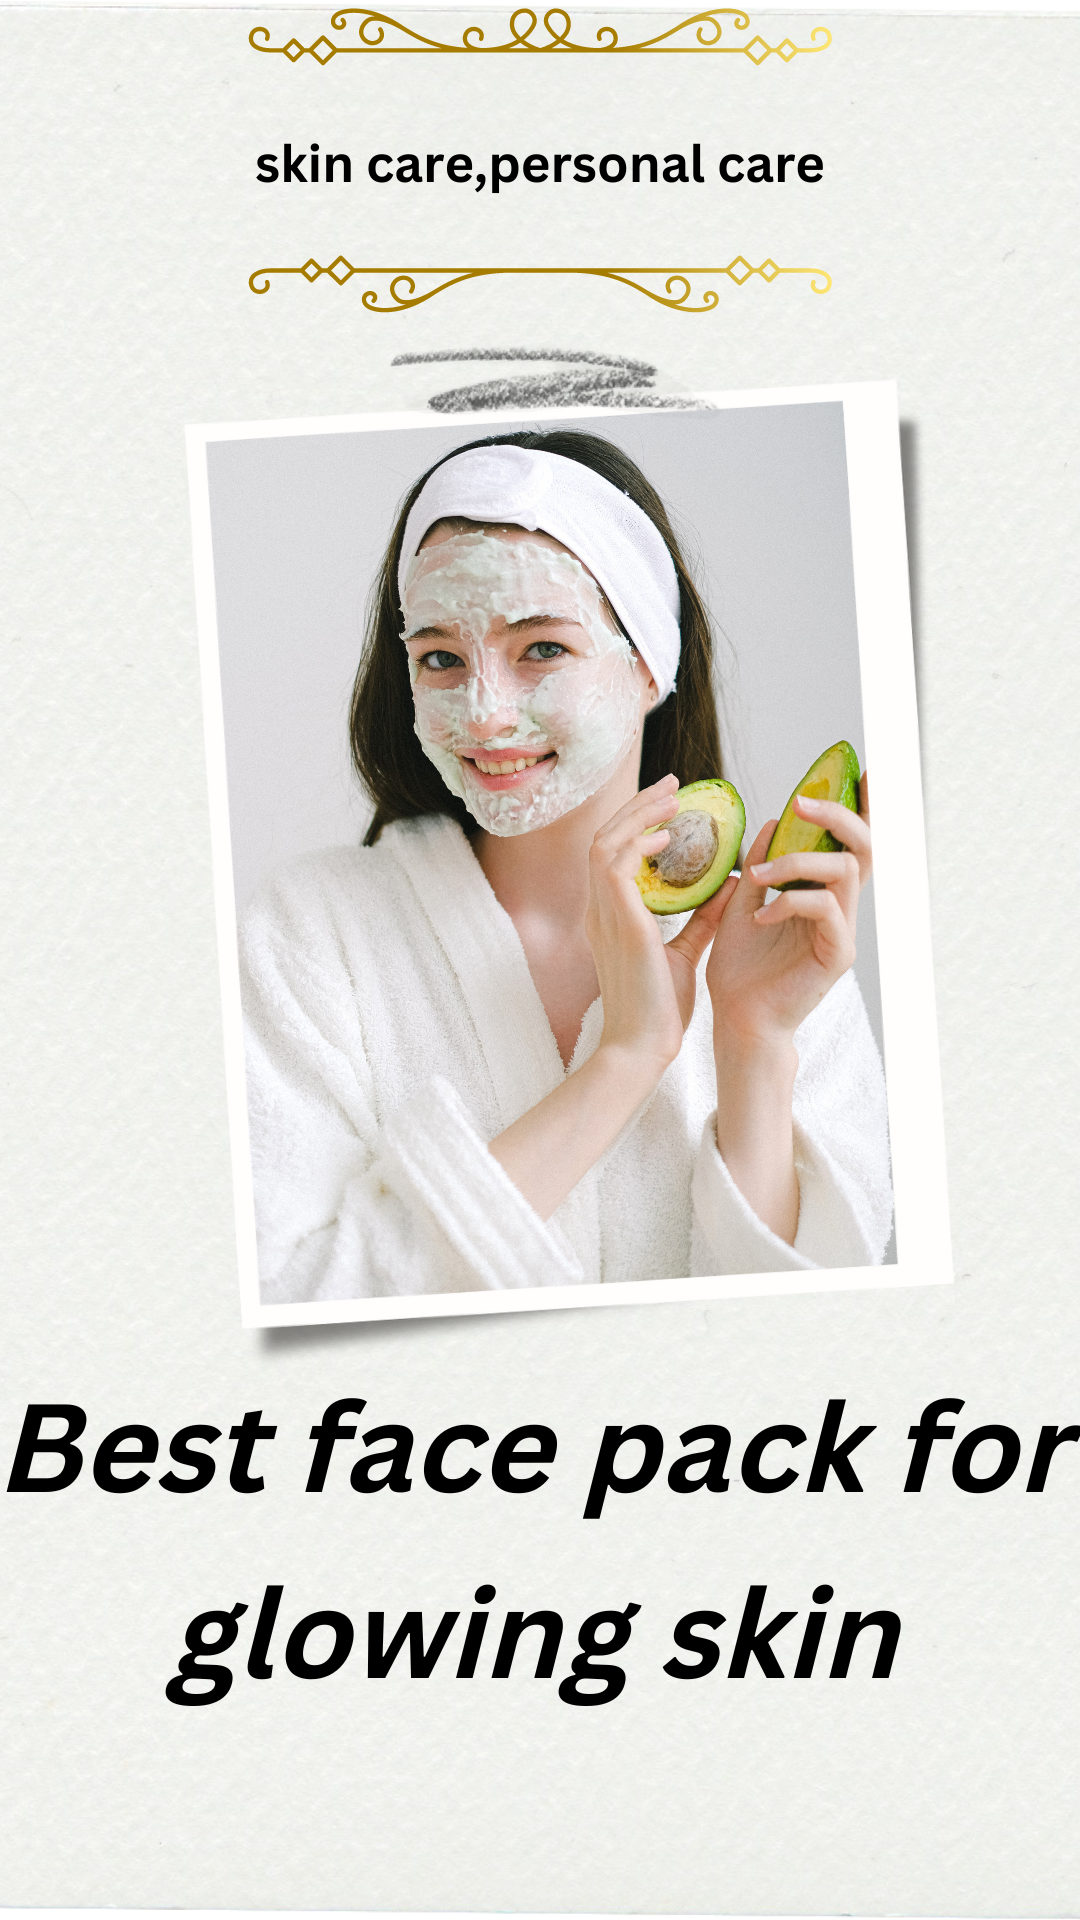 Best Face Pack For Glowing Skin In India:-